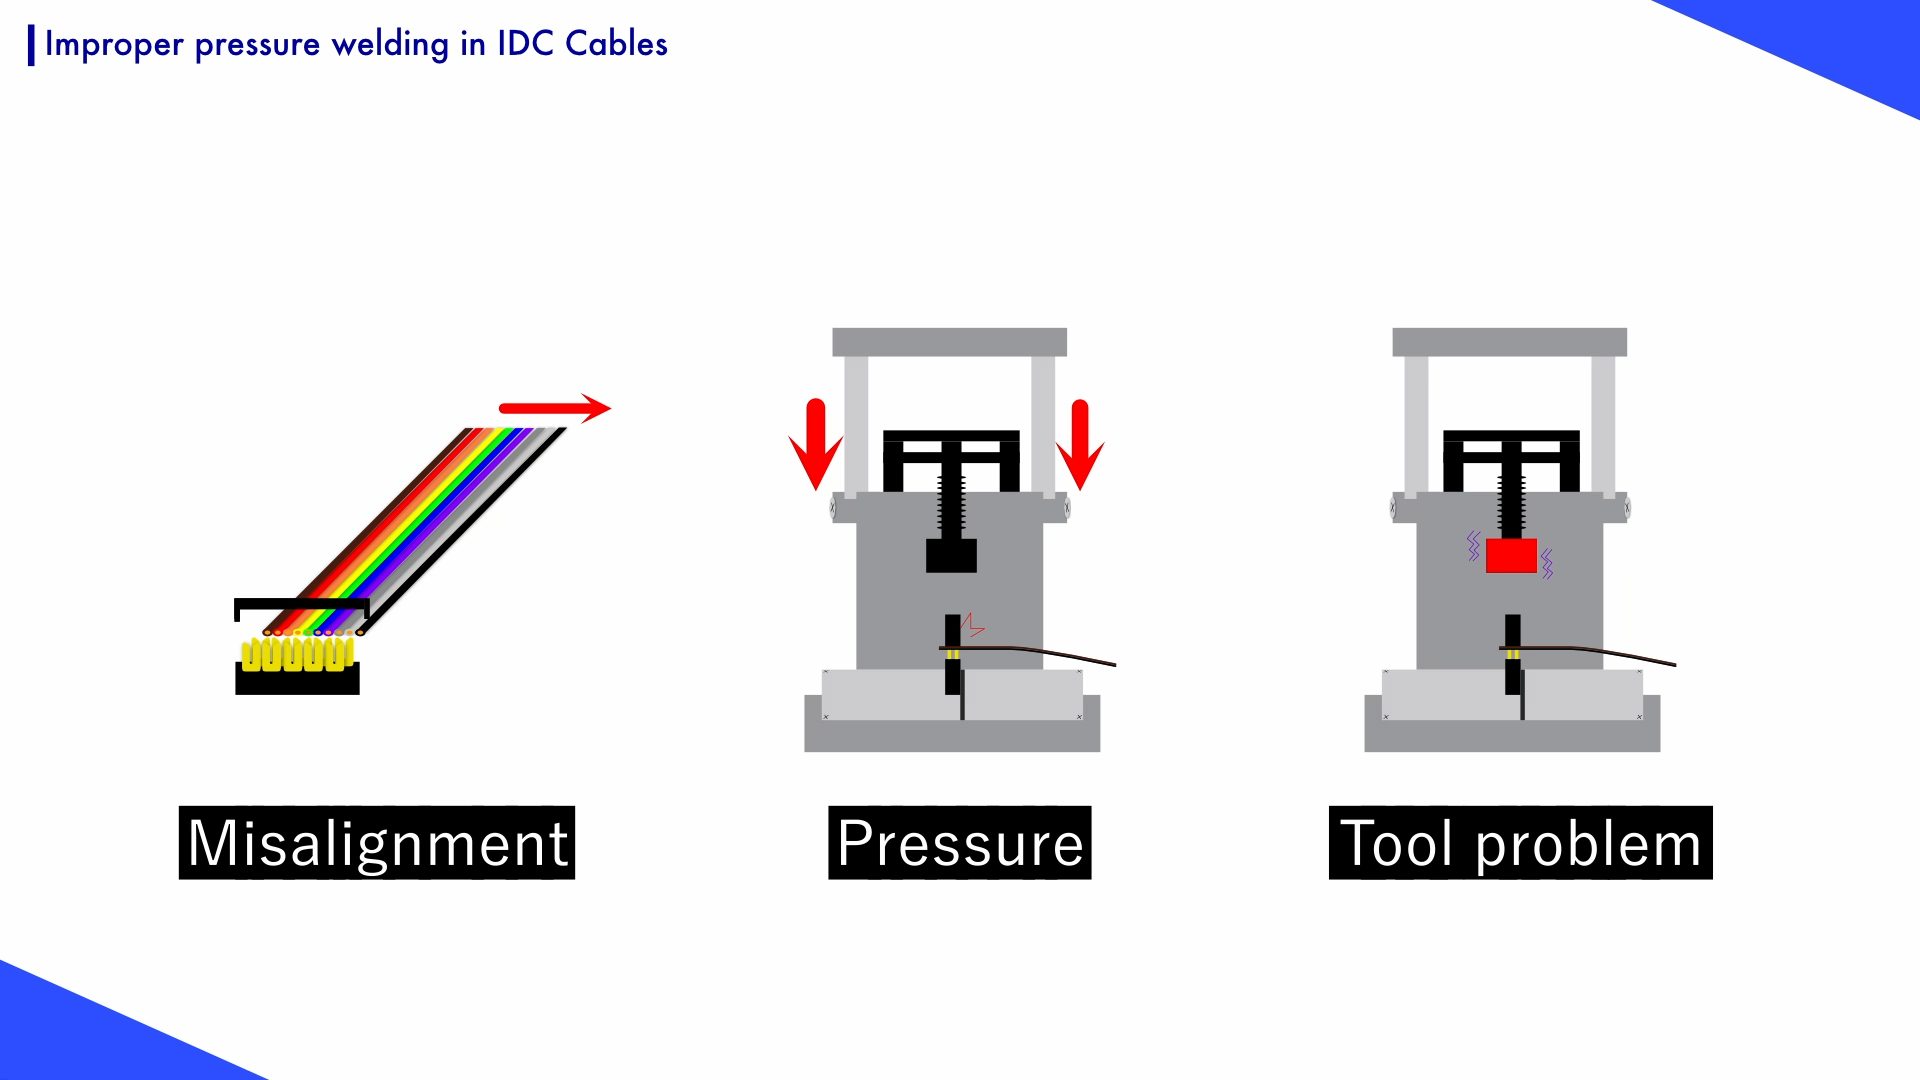 Causes of IDC cable pressure welding failure